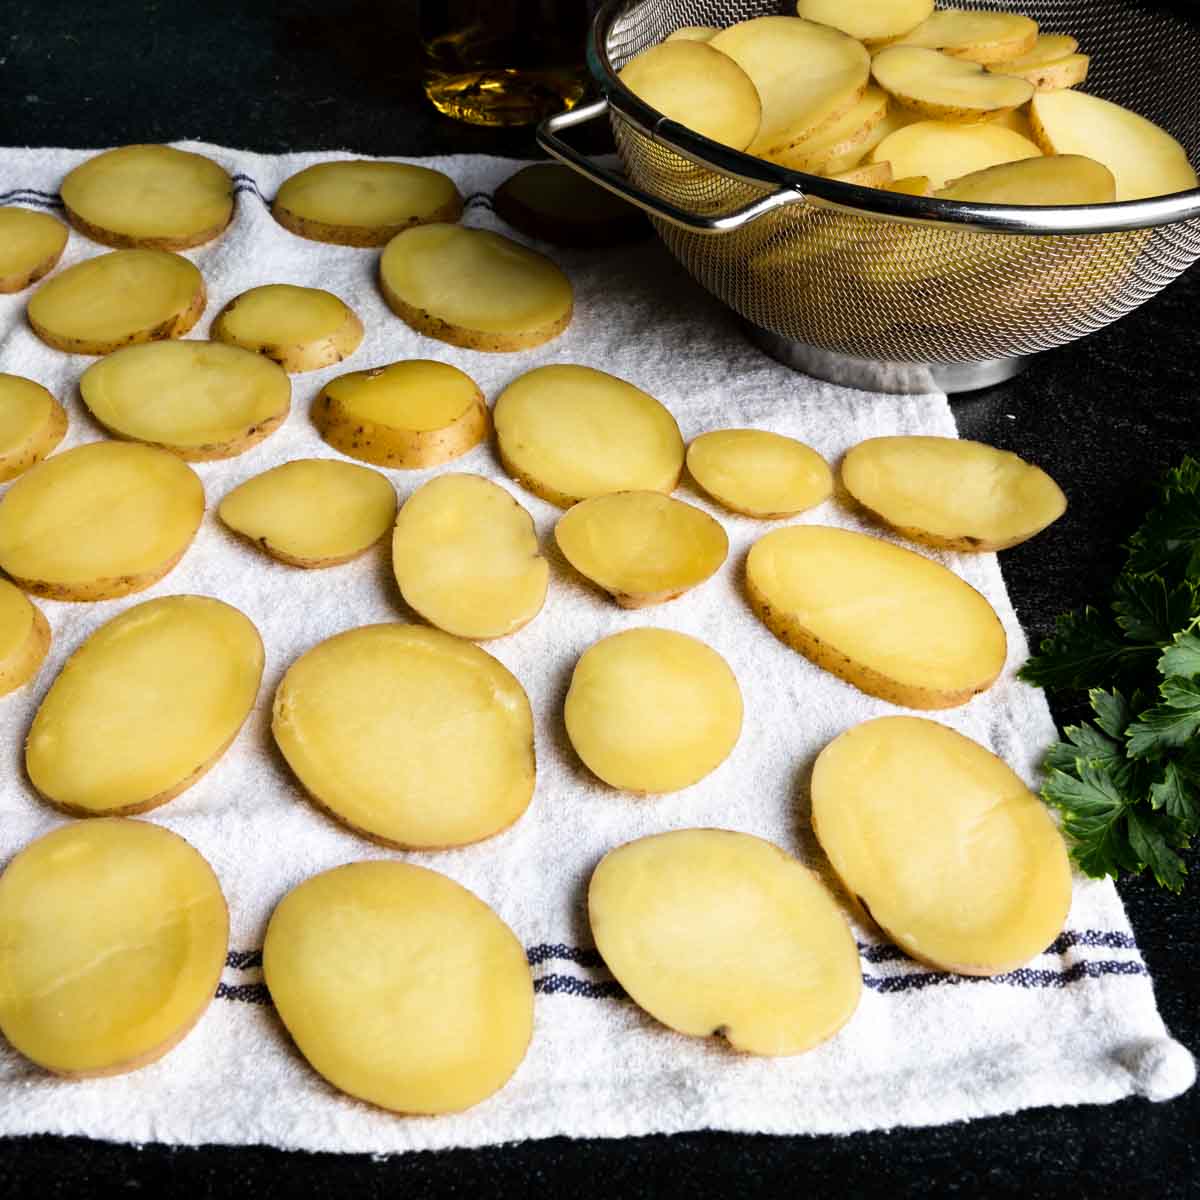 Sliced, par-boiled potatoes drying on a clean kitchen towel